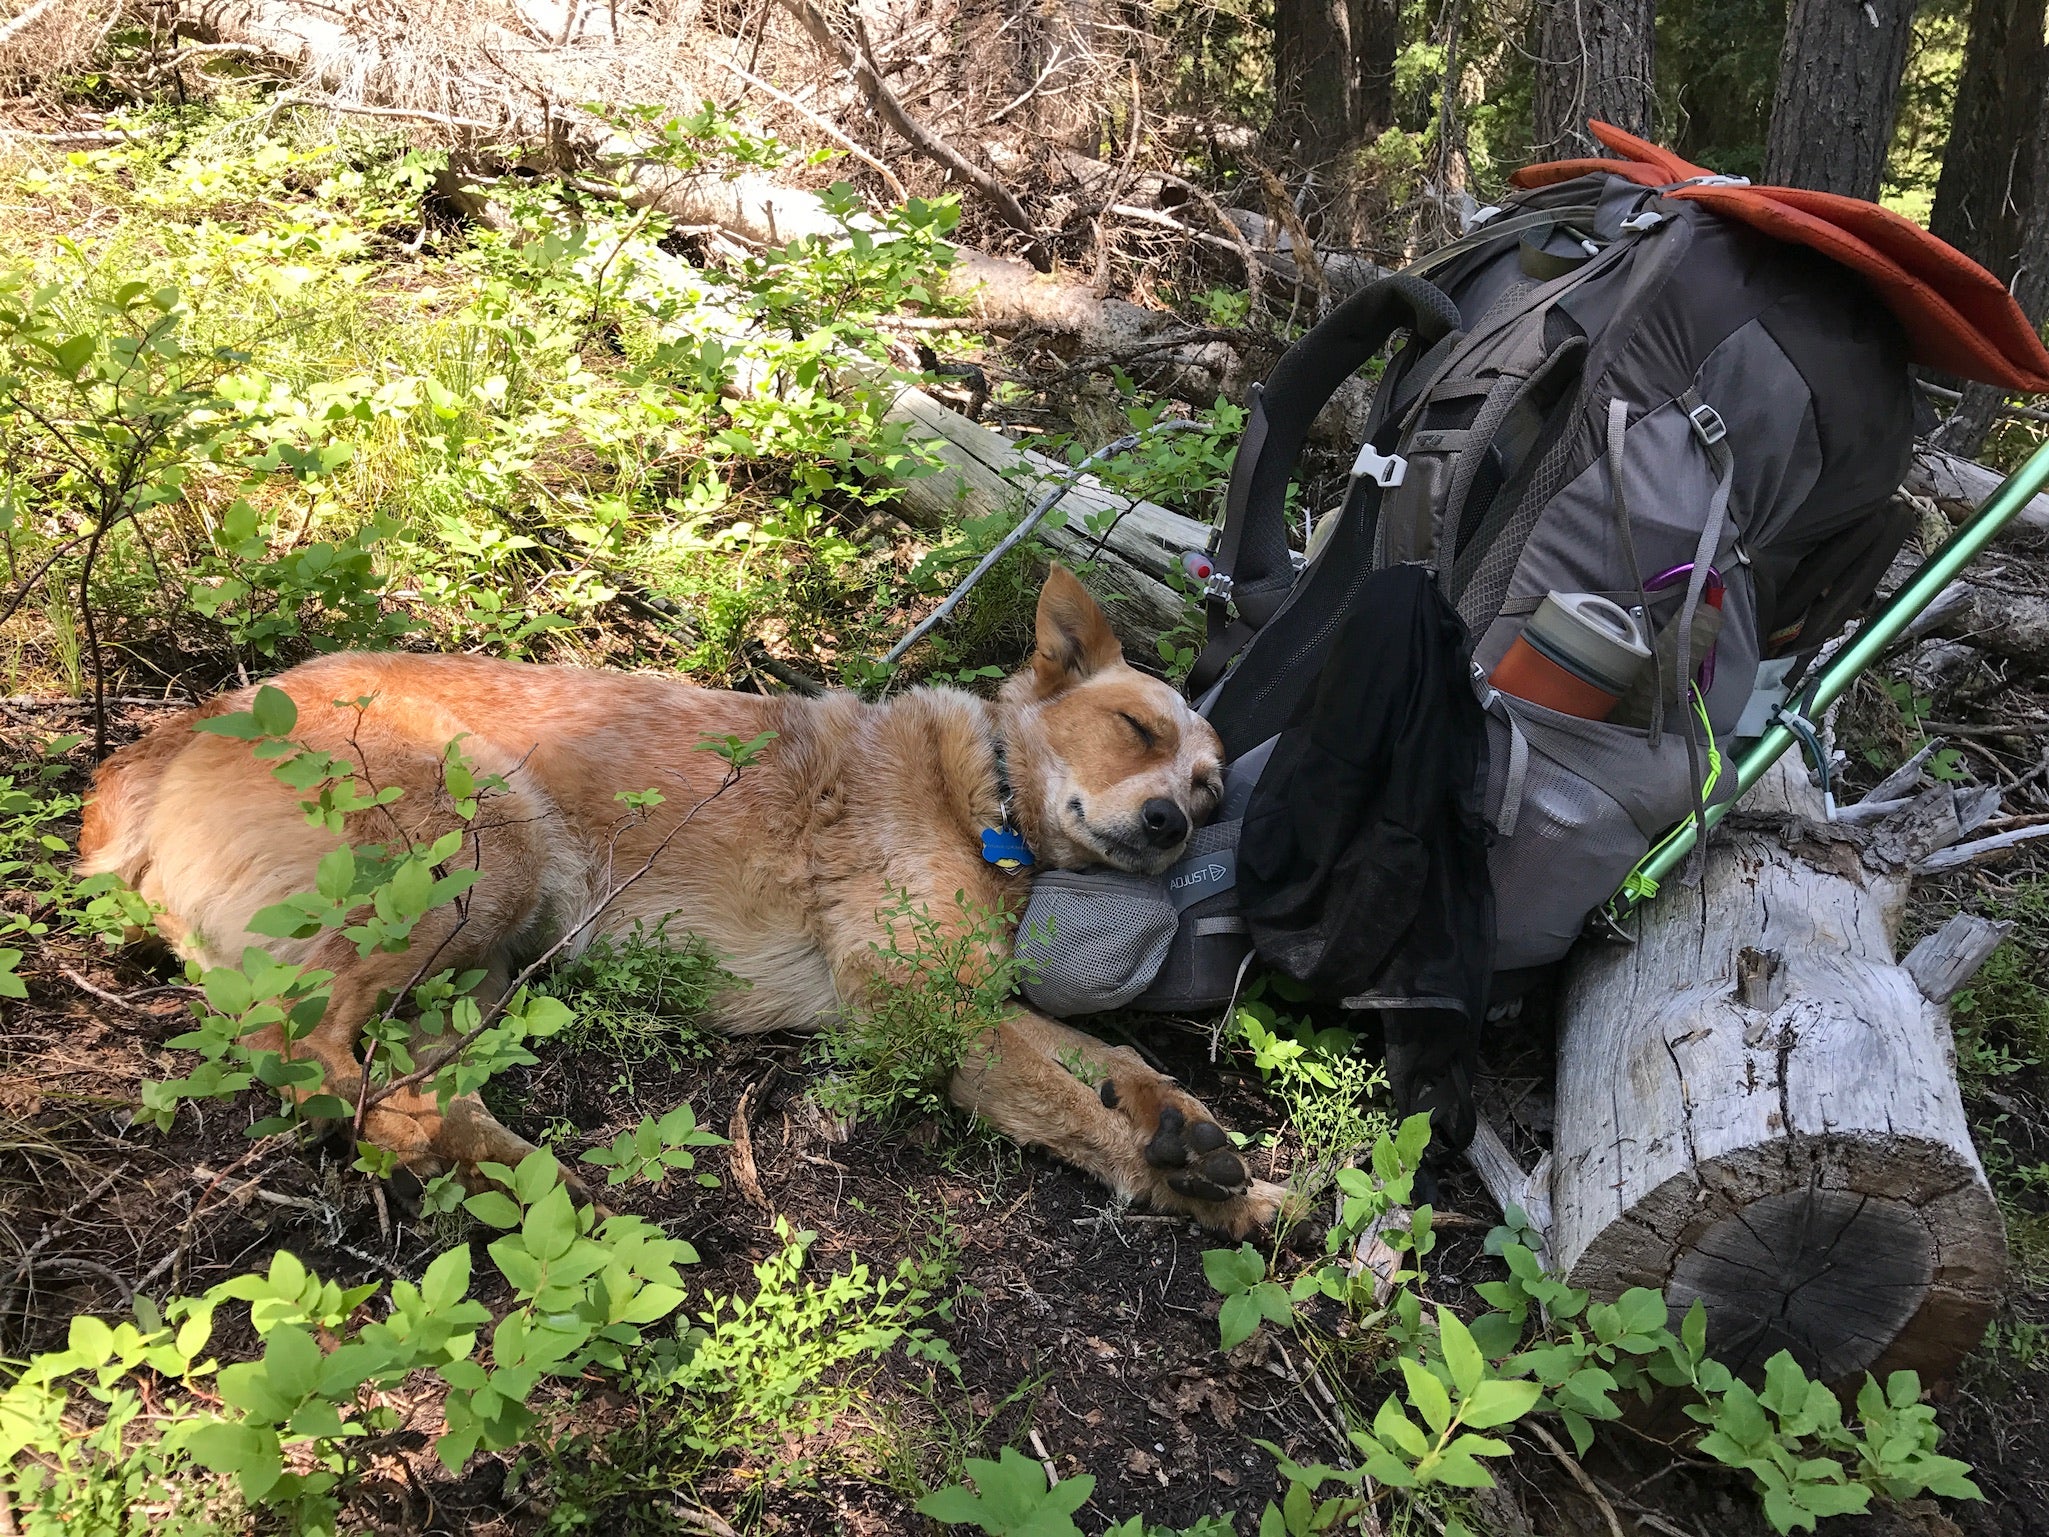 Besides being a great pack it also provided a great pillow for a sleepy dog during one of our meal breaks.  This also shows that it needed some front support to stand up as it didn't free stand very well.